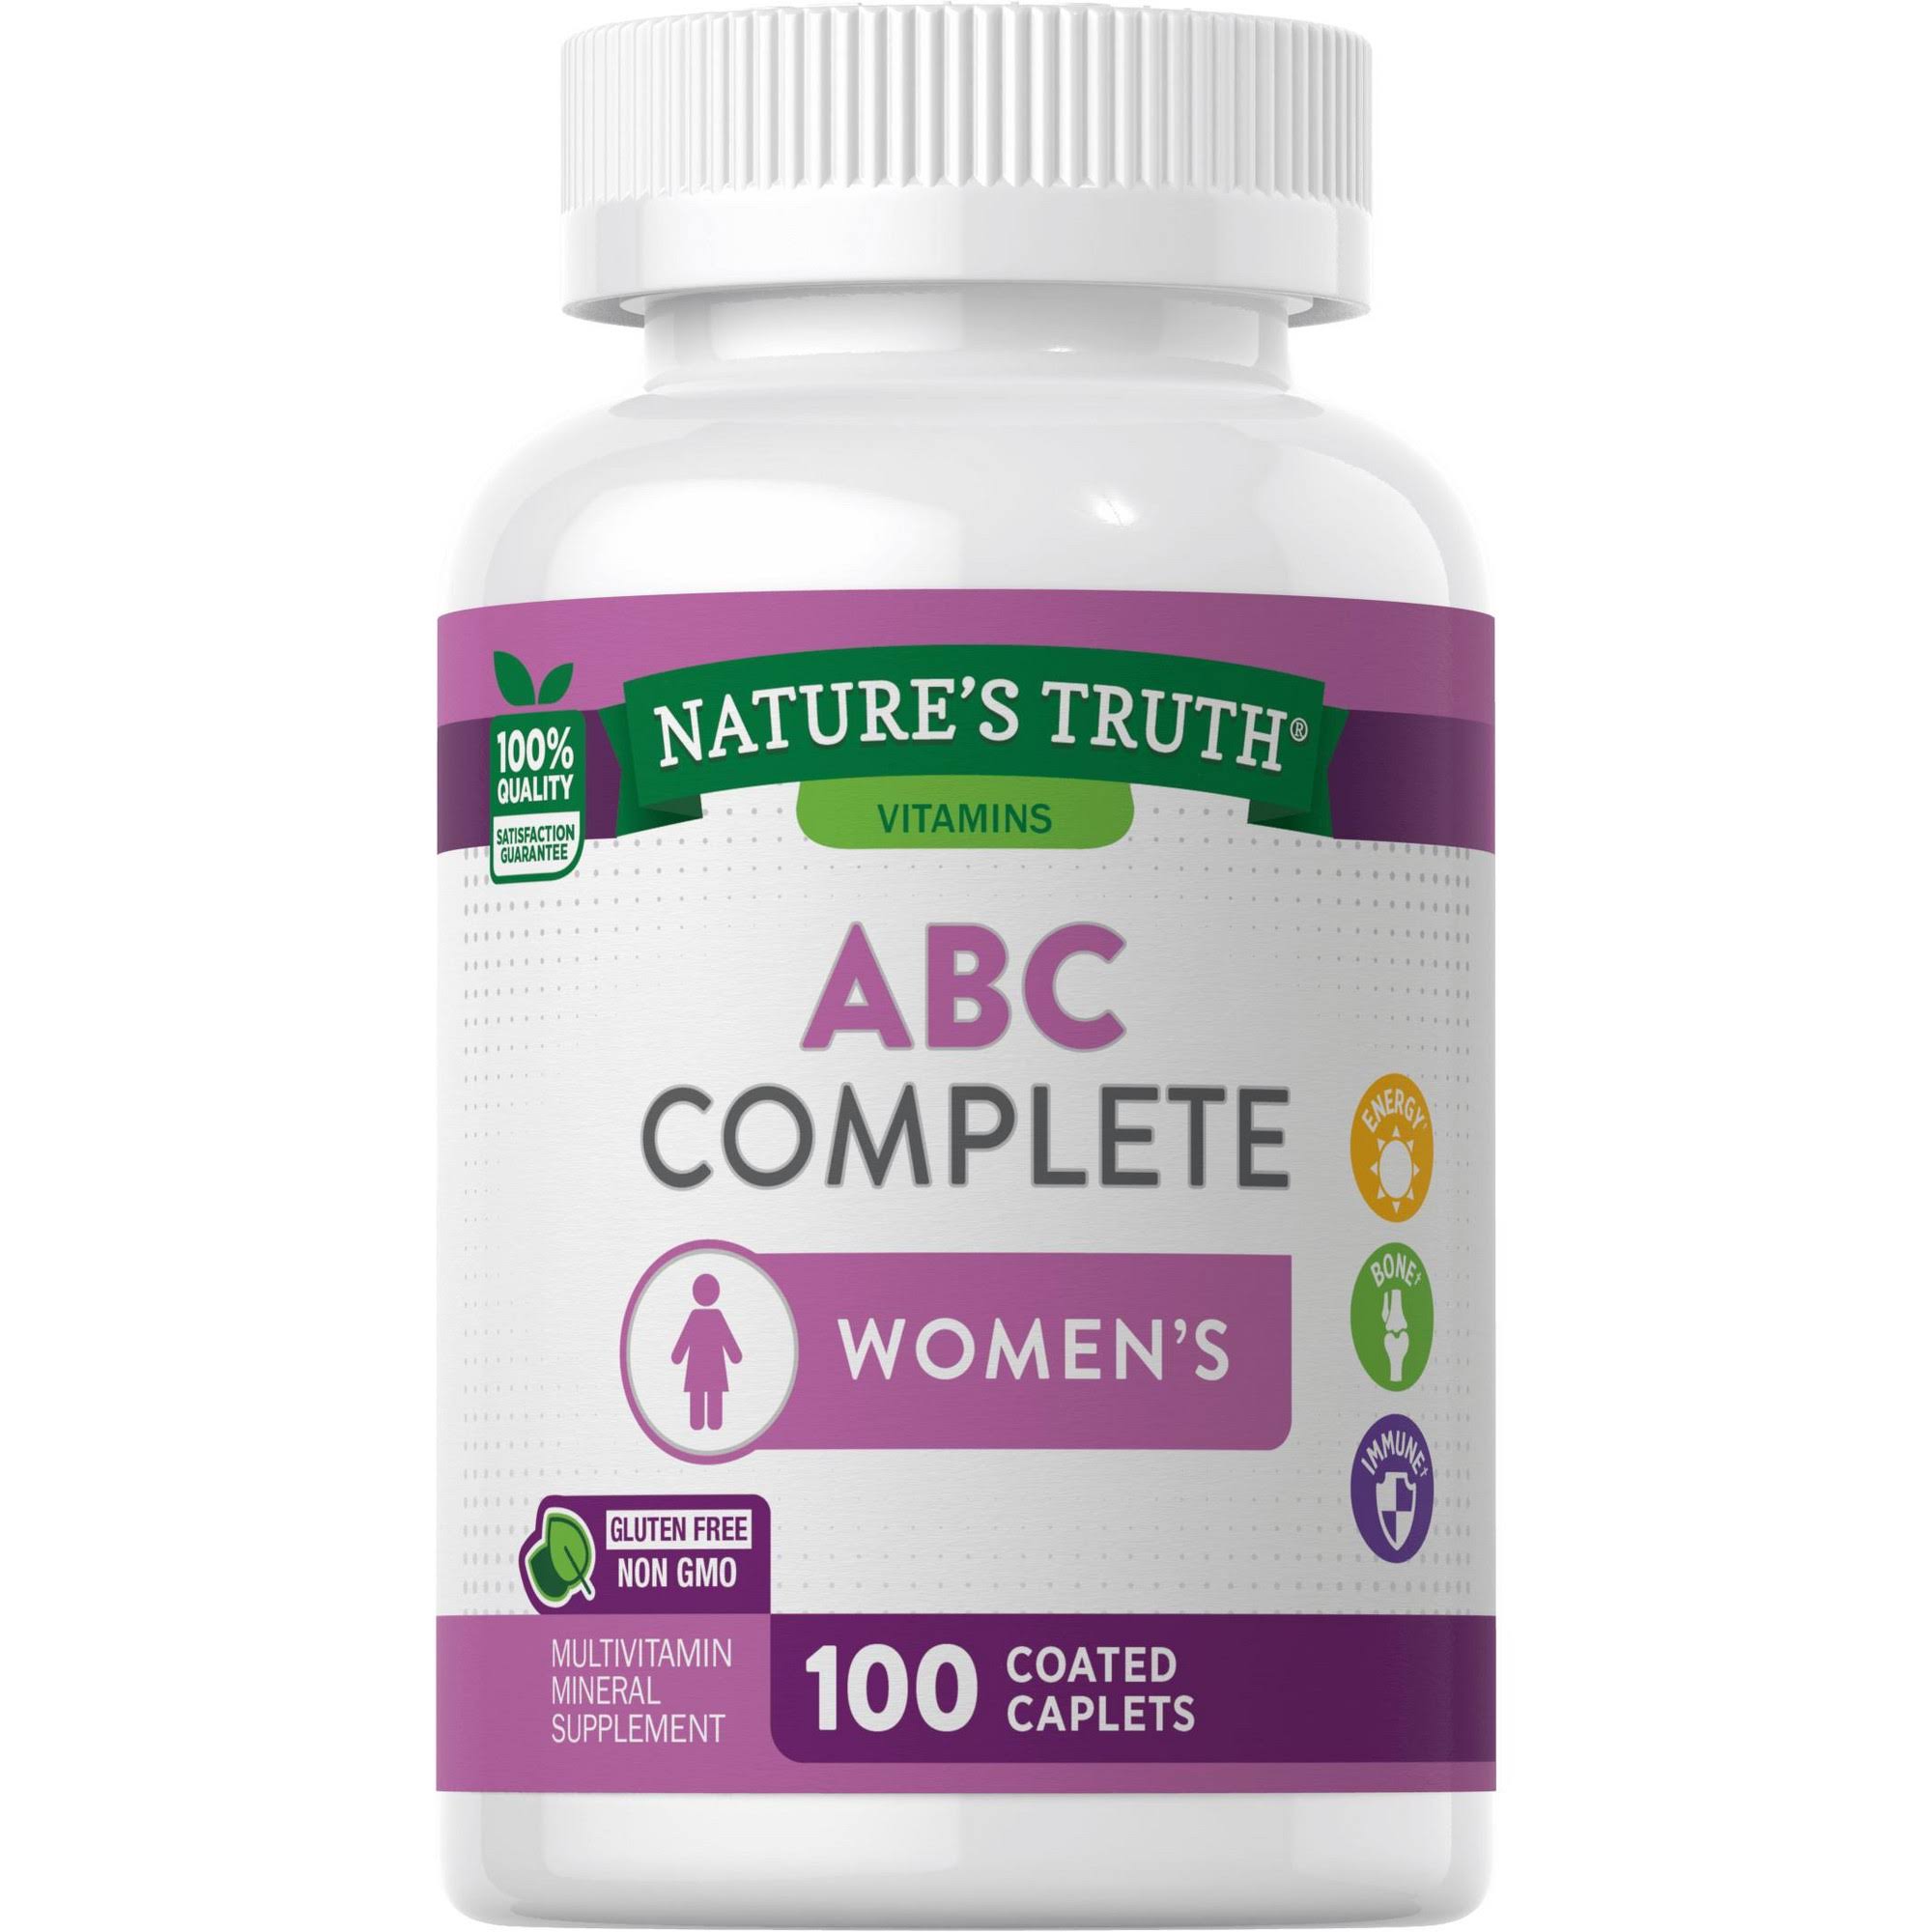 Nature's Truth ABC Complete Women's Multivitamin, 100 Tabs (Pack of 1)